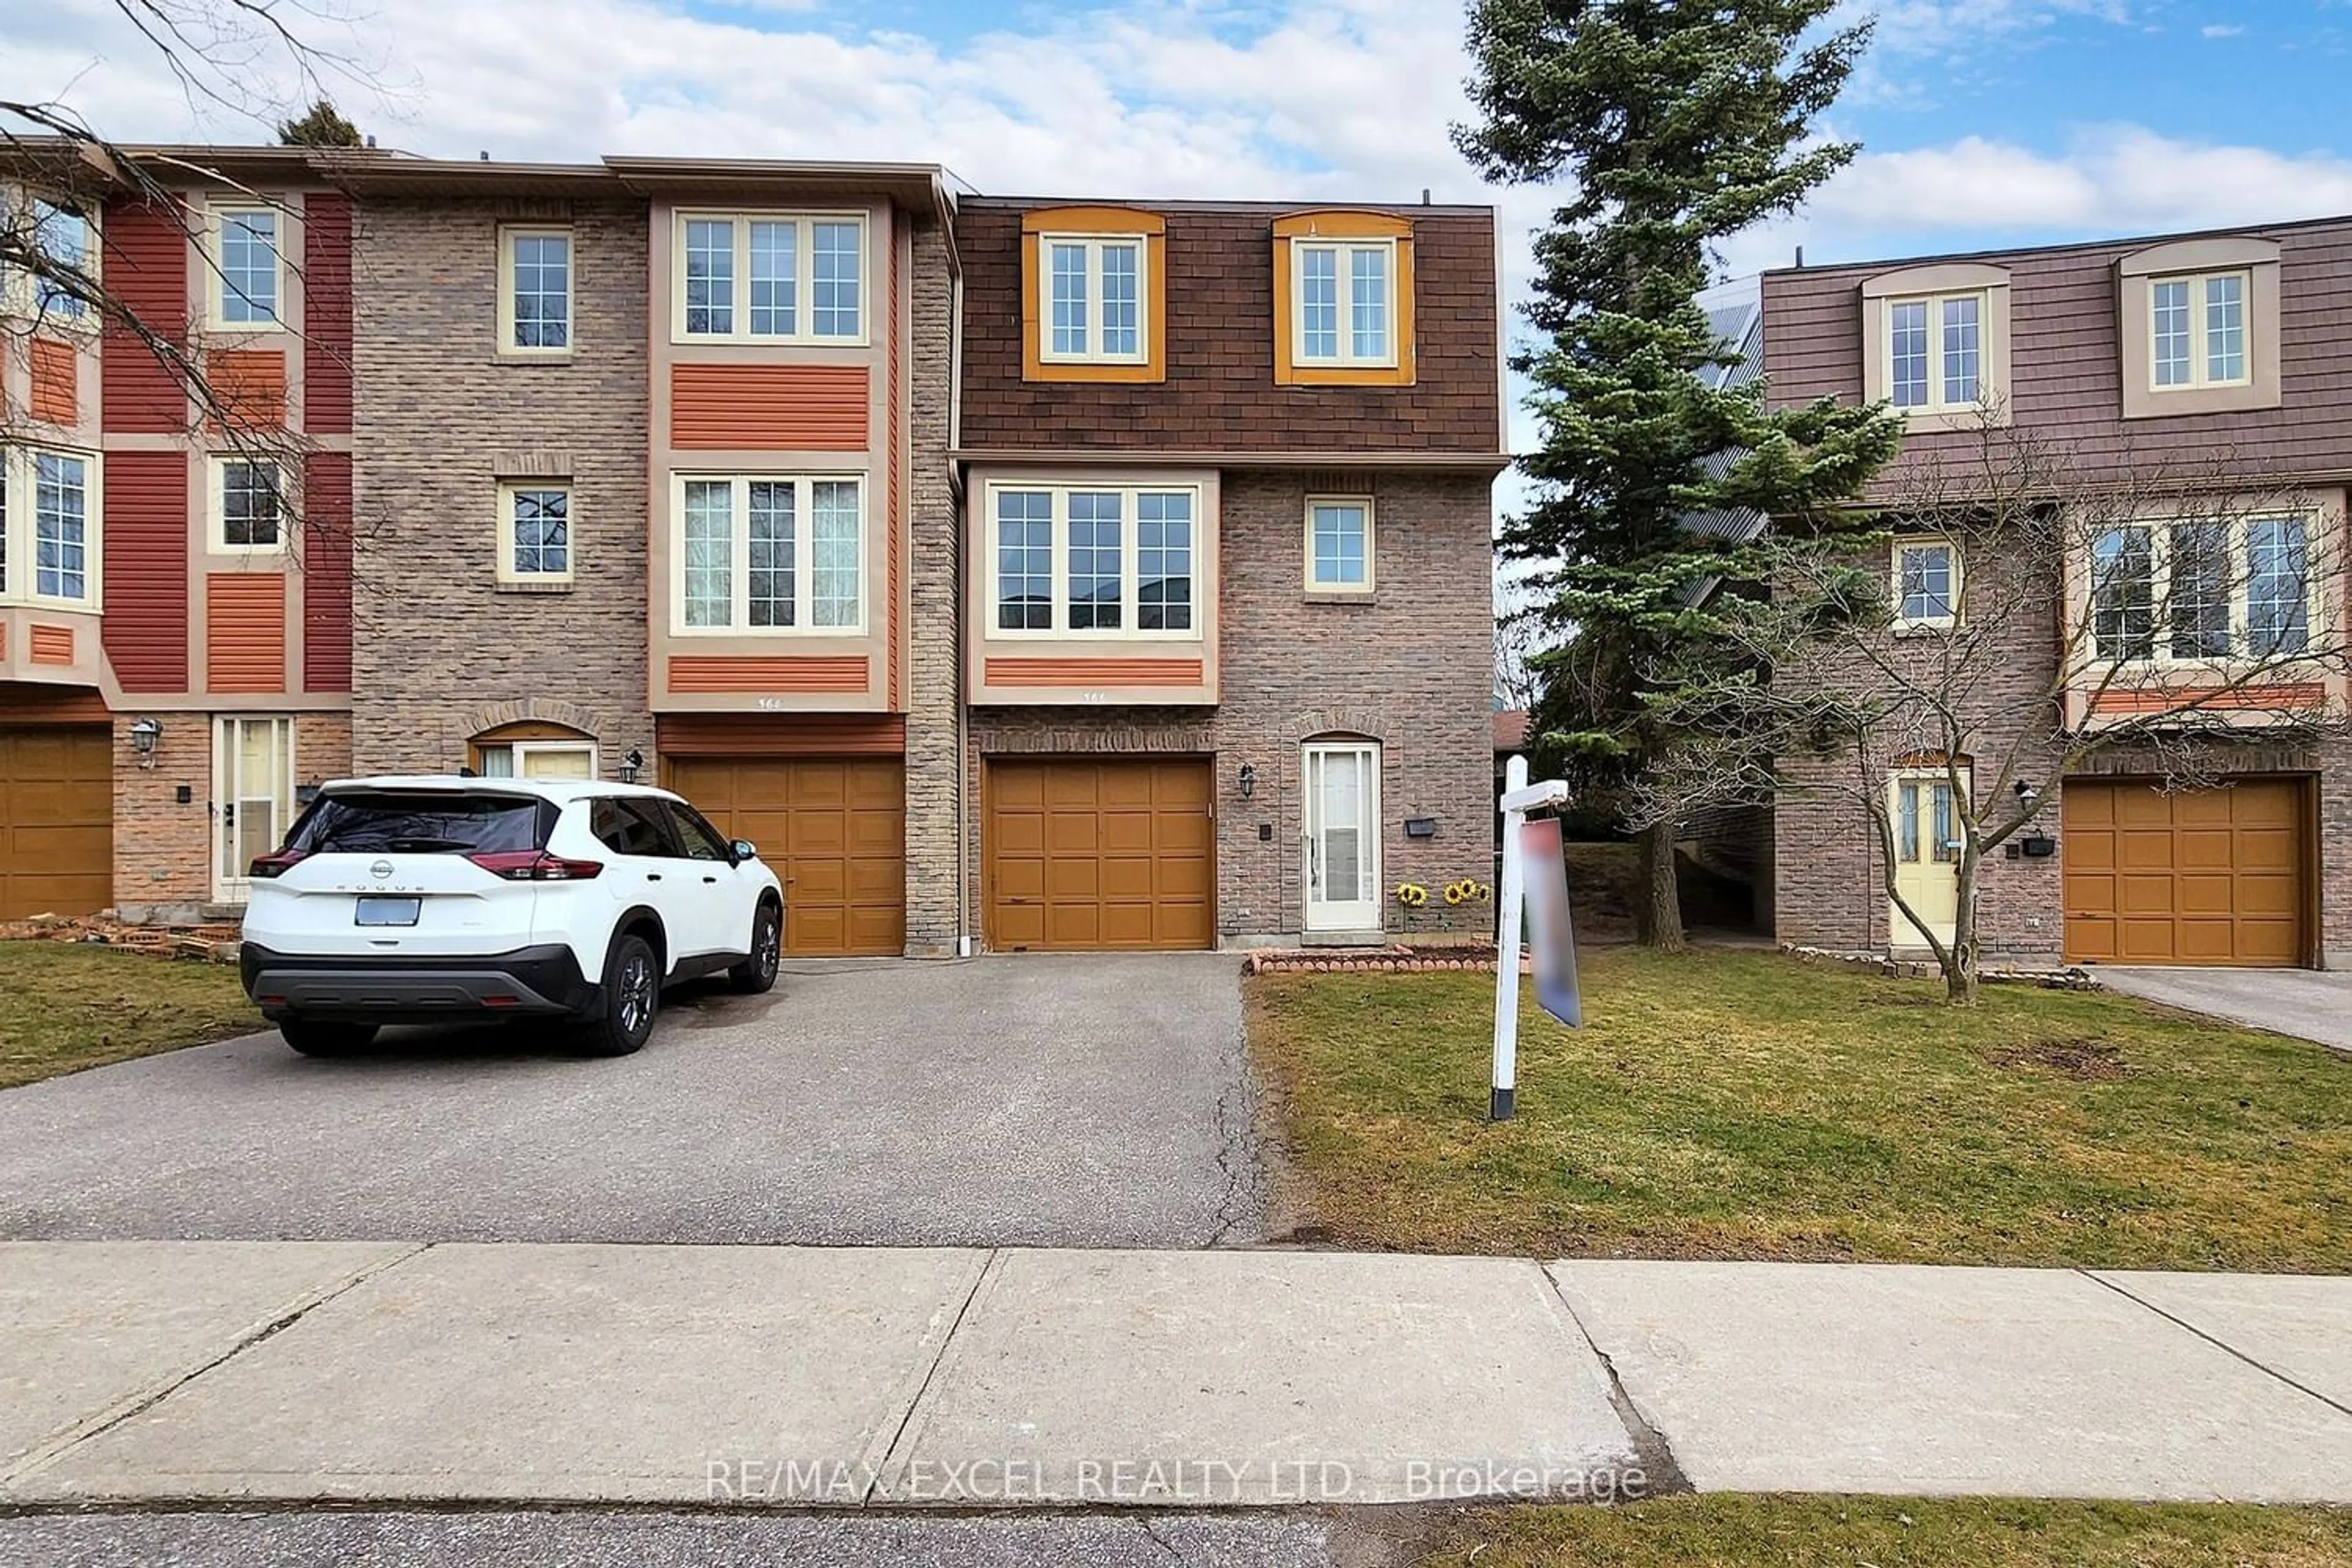 A pic from exterior of the house or condo for 566 Sandhurst Circ, Toronto Ontario M1S 4J6